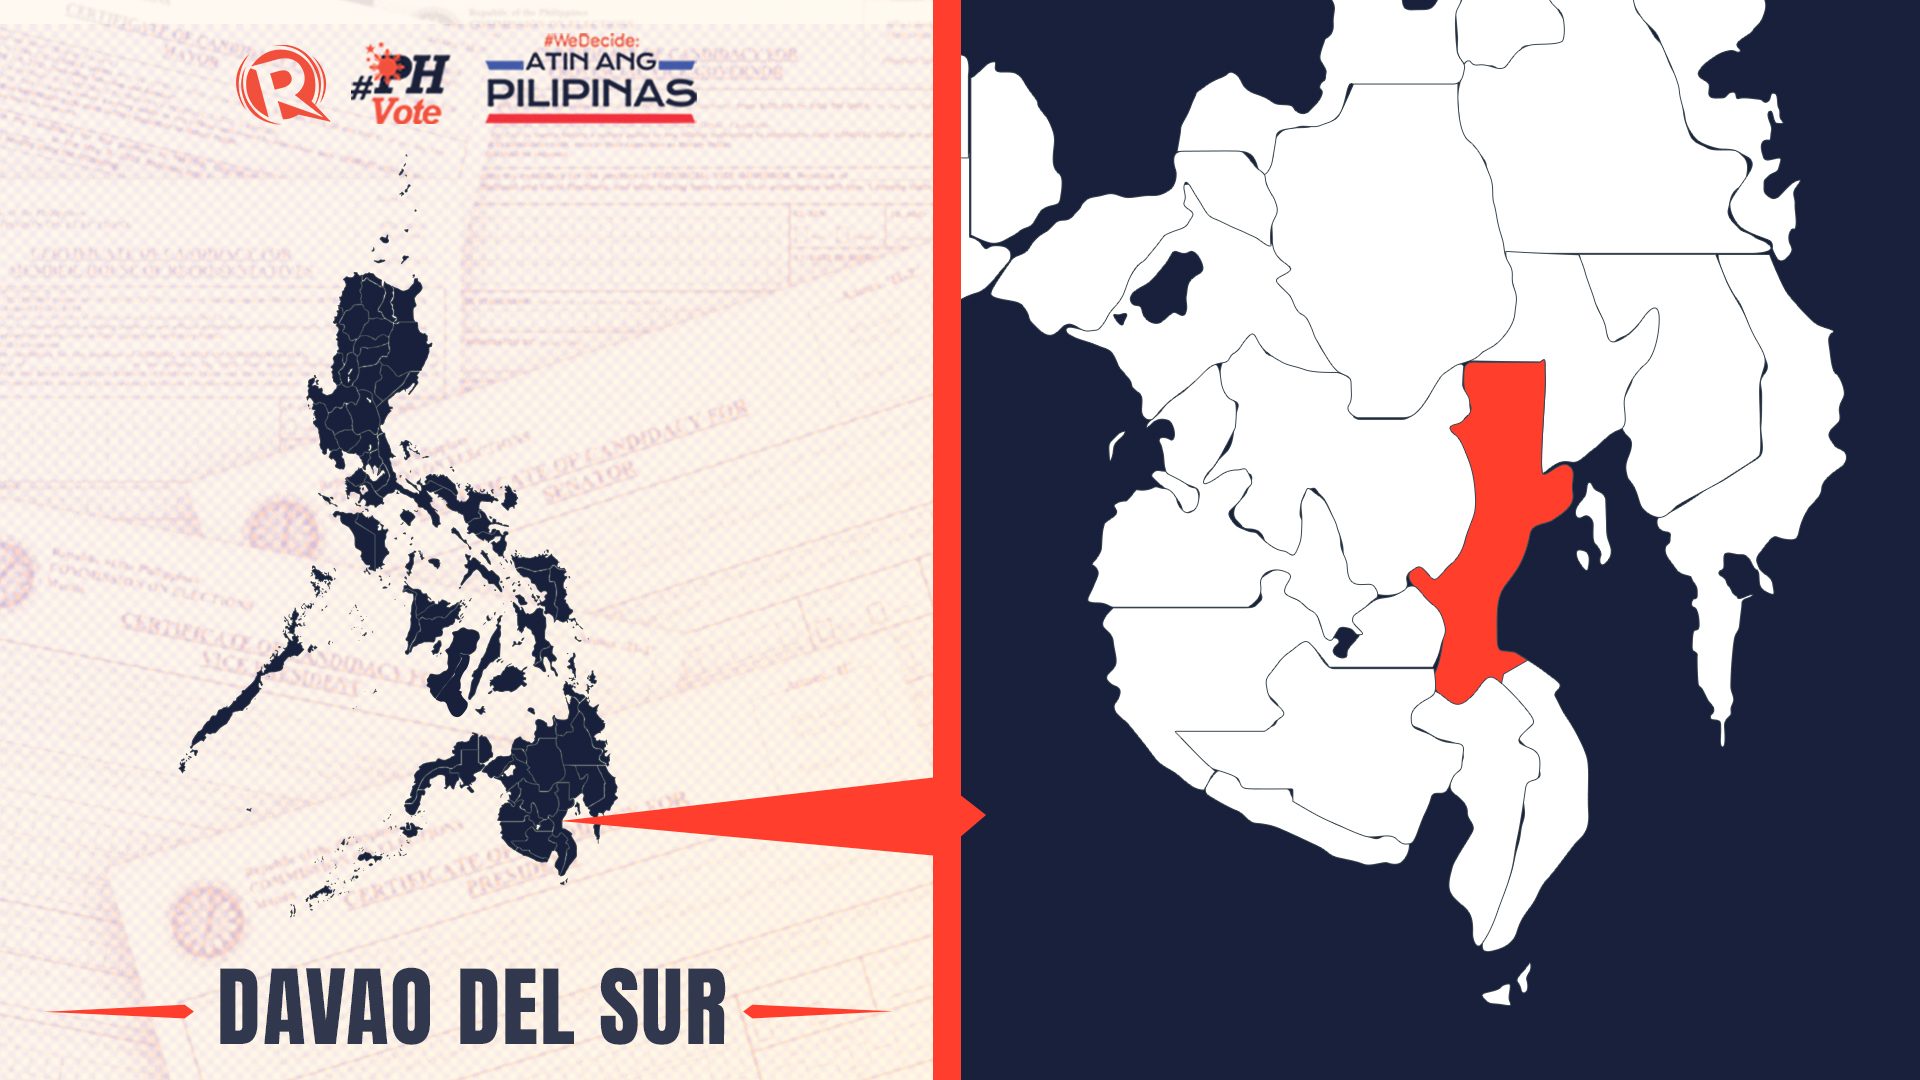 LIST: Who is running in Davao del Sur in the 2022 Philippine elections?